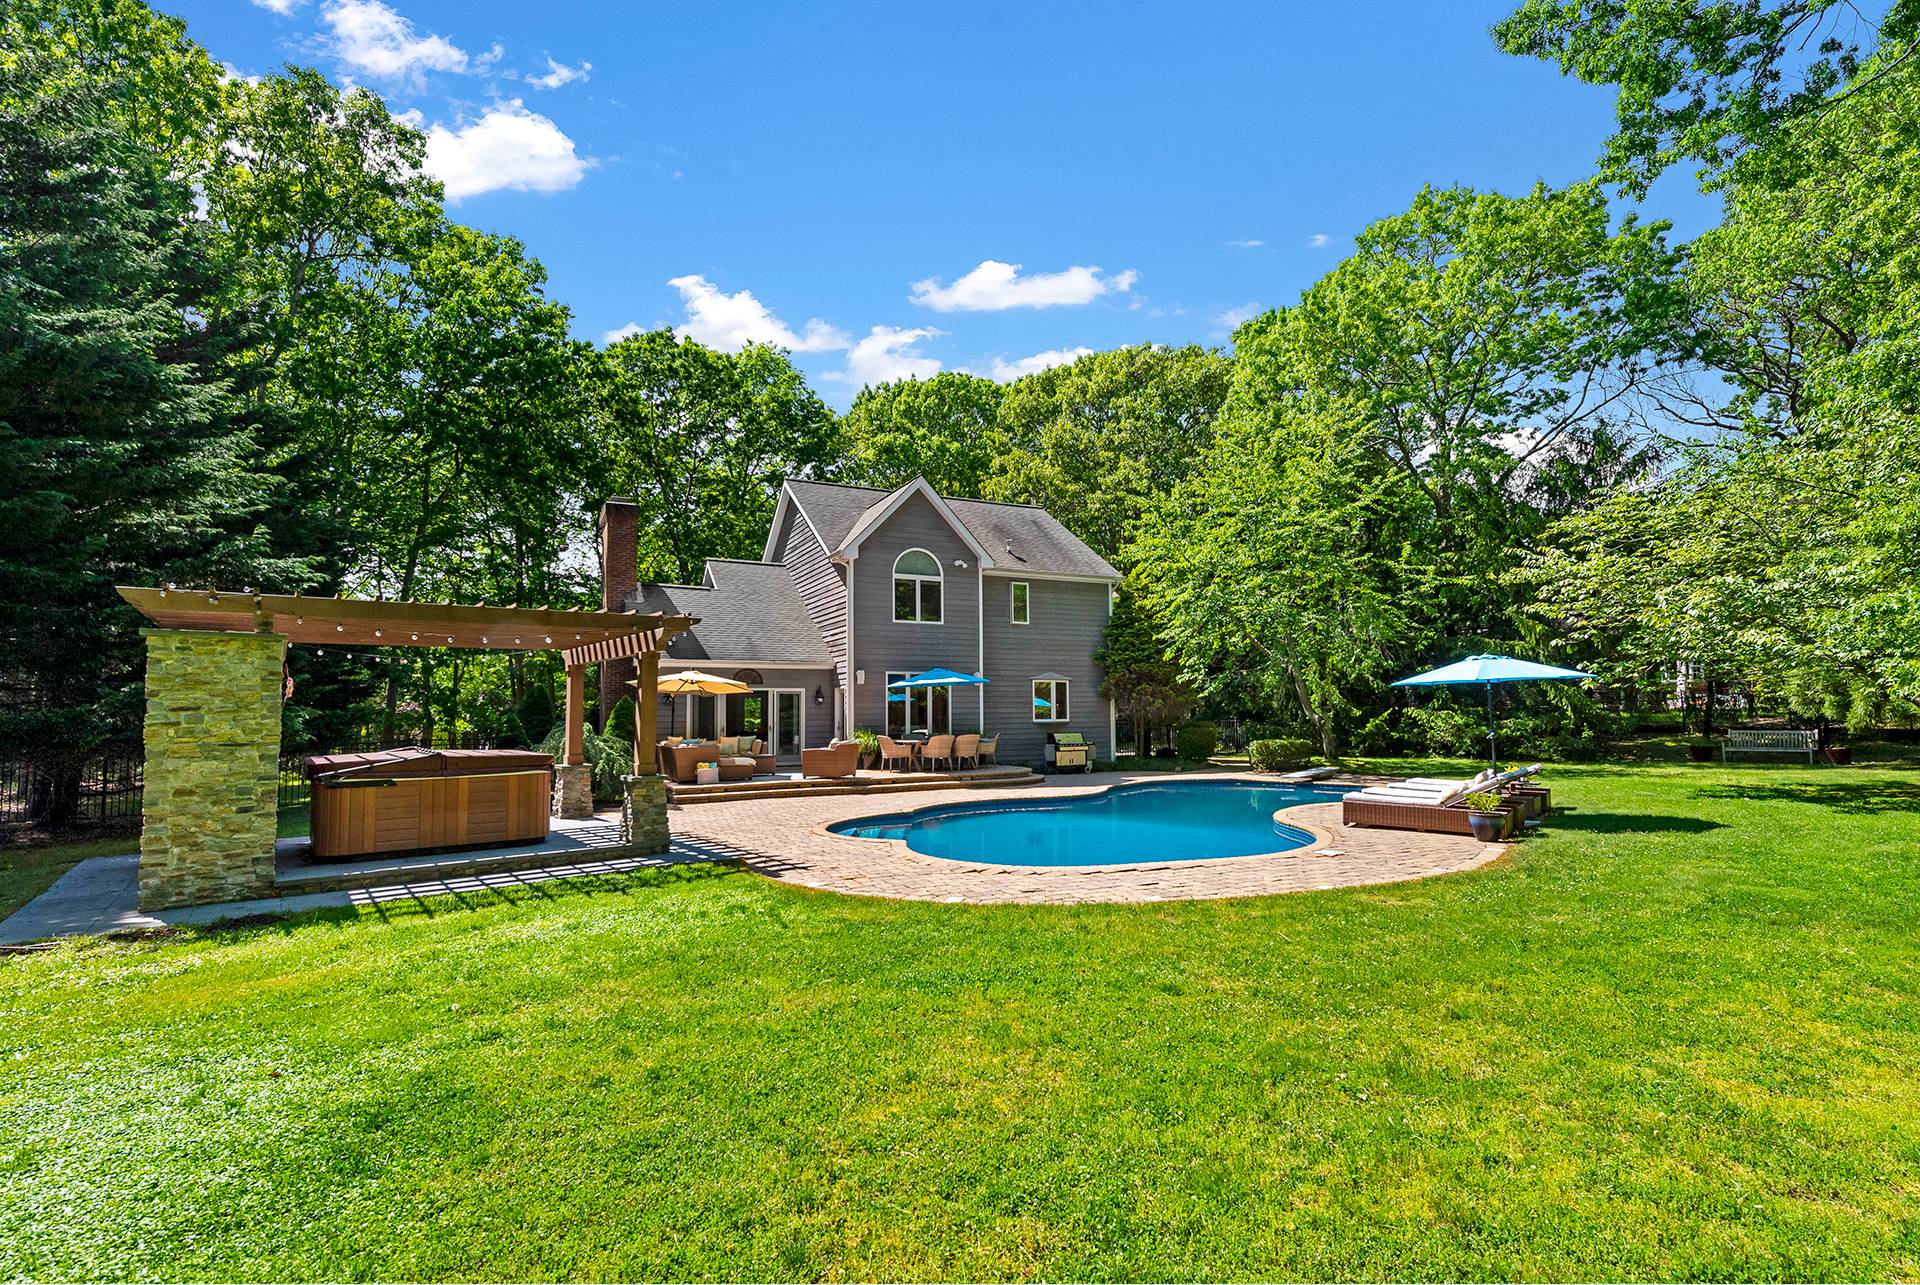 Property for Sale at 548 Ruggs Path, Sag Harbor, Hamptons, NY - Bedrooms: 4 
Bathrooms: 2.5  - $2,599,000